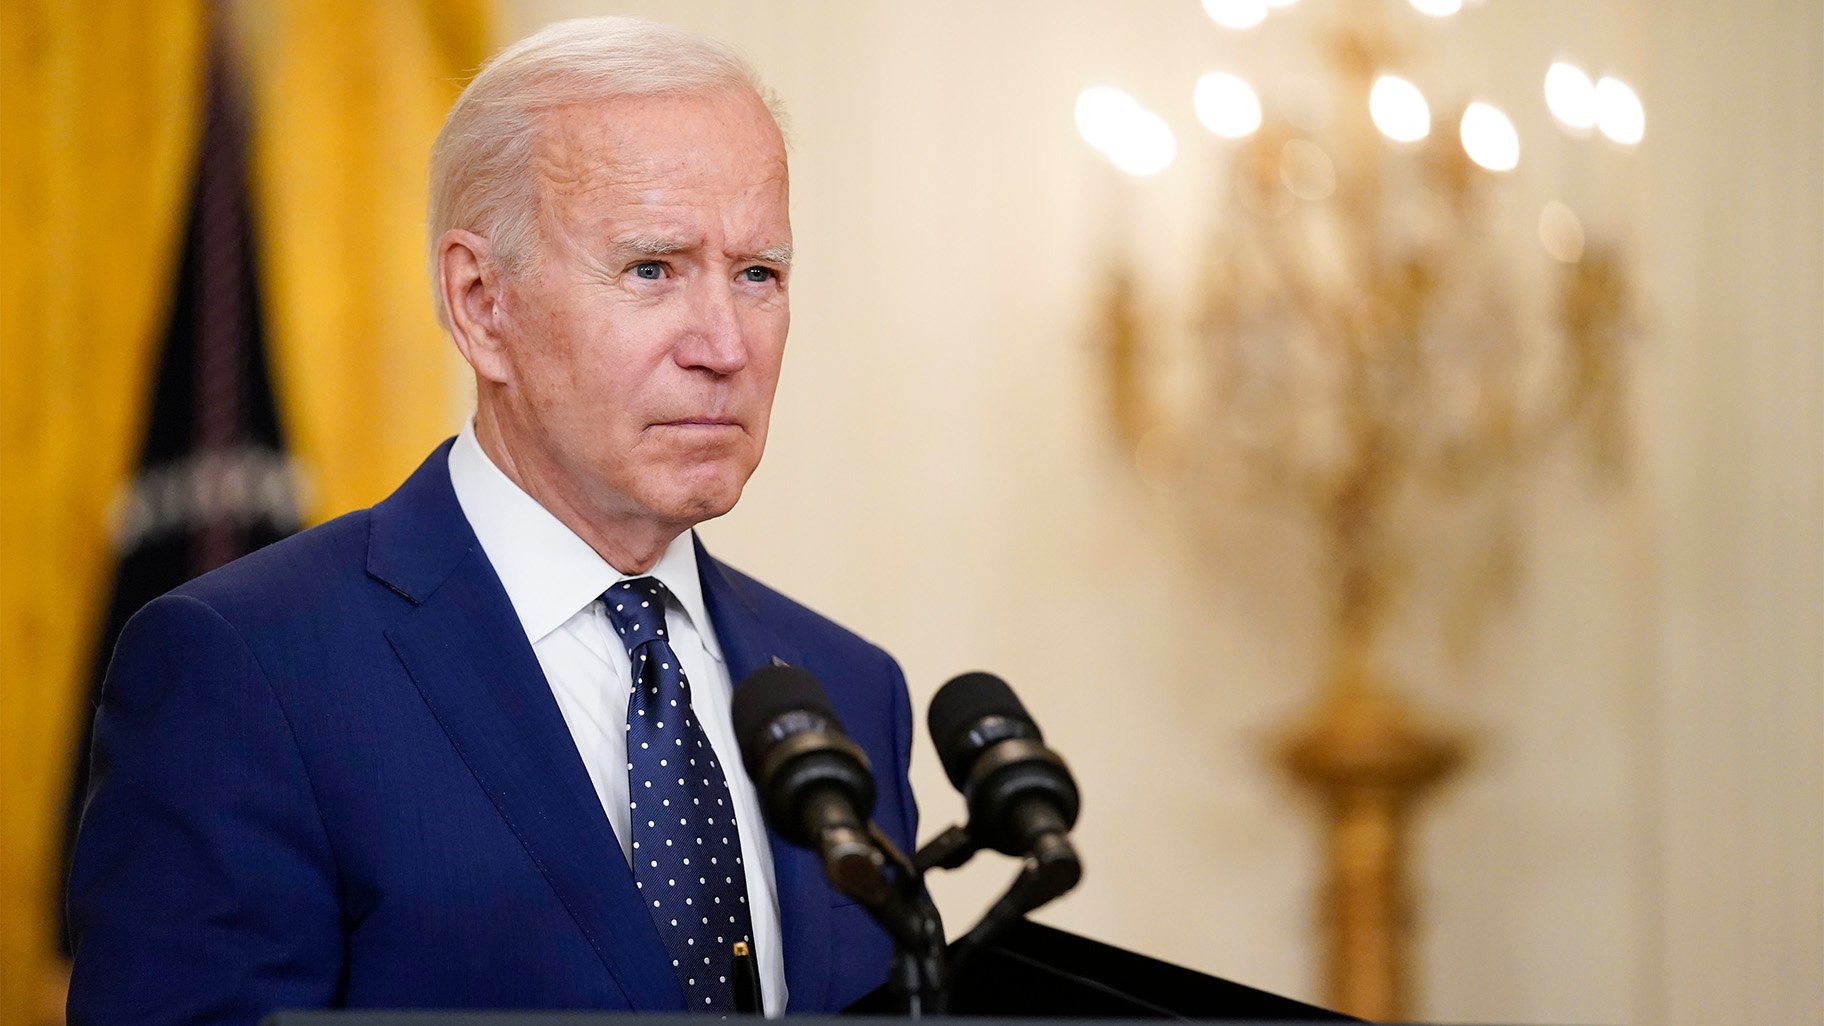 Russia imposes sanctions on US President Biden